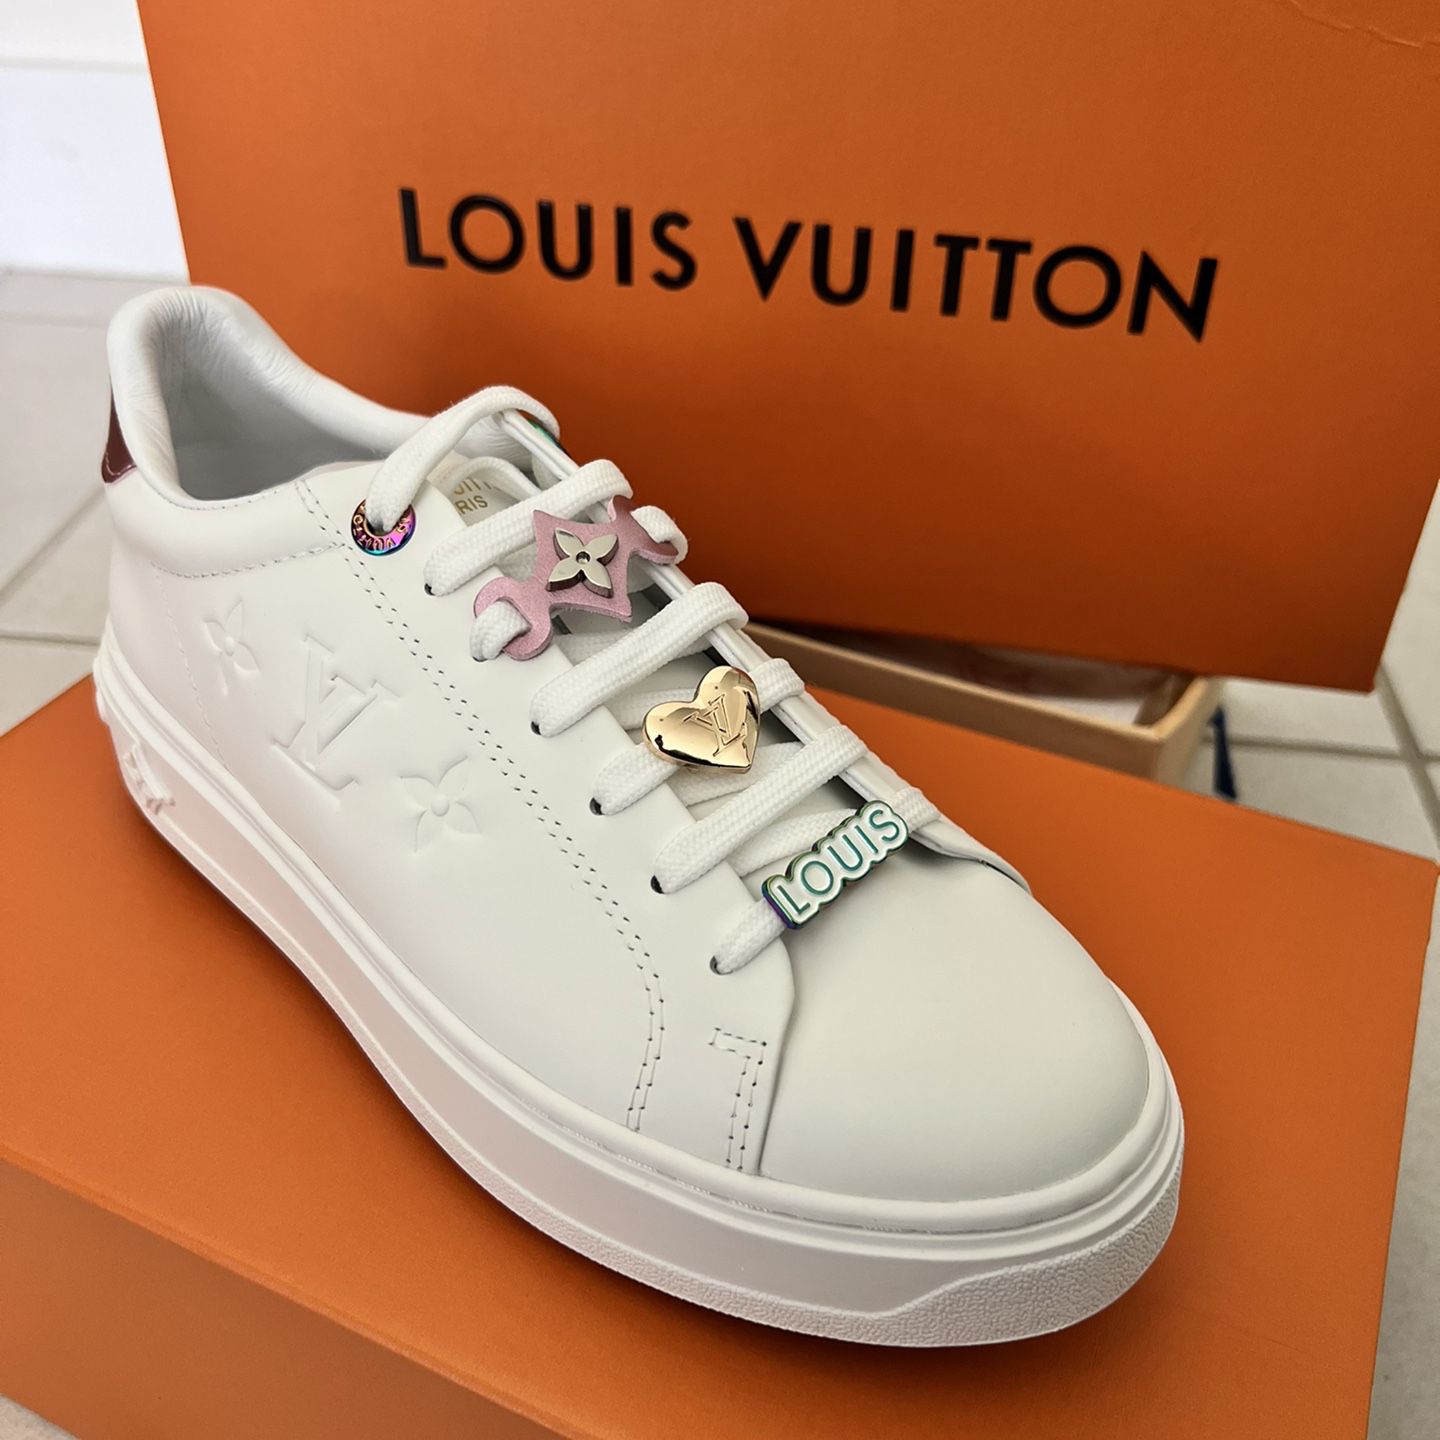 LV Sneakers Shoes Size 9.5 Men for Sale in Fort Lauderdale, FL - OfferUp